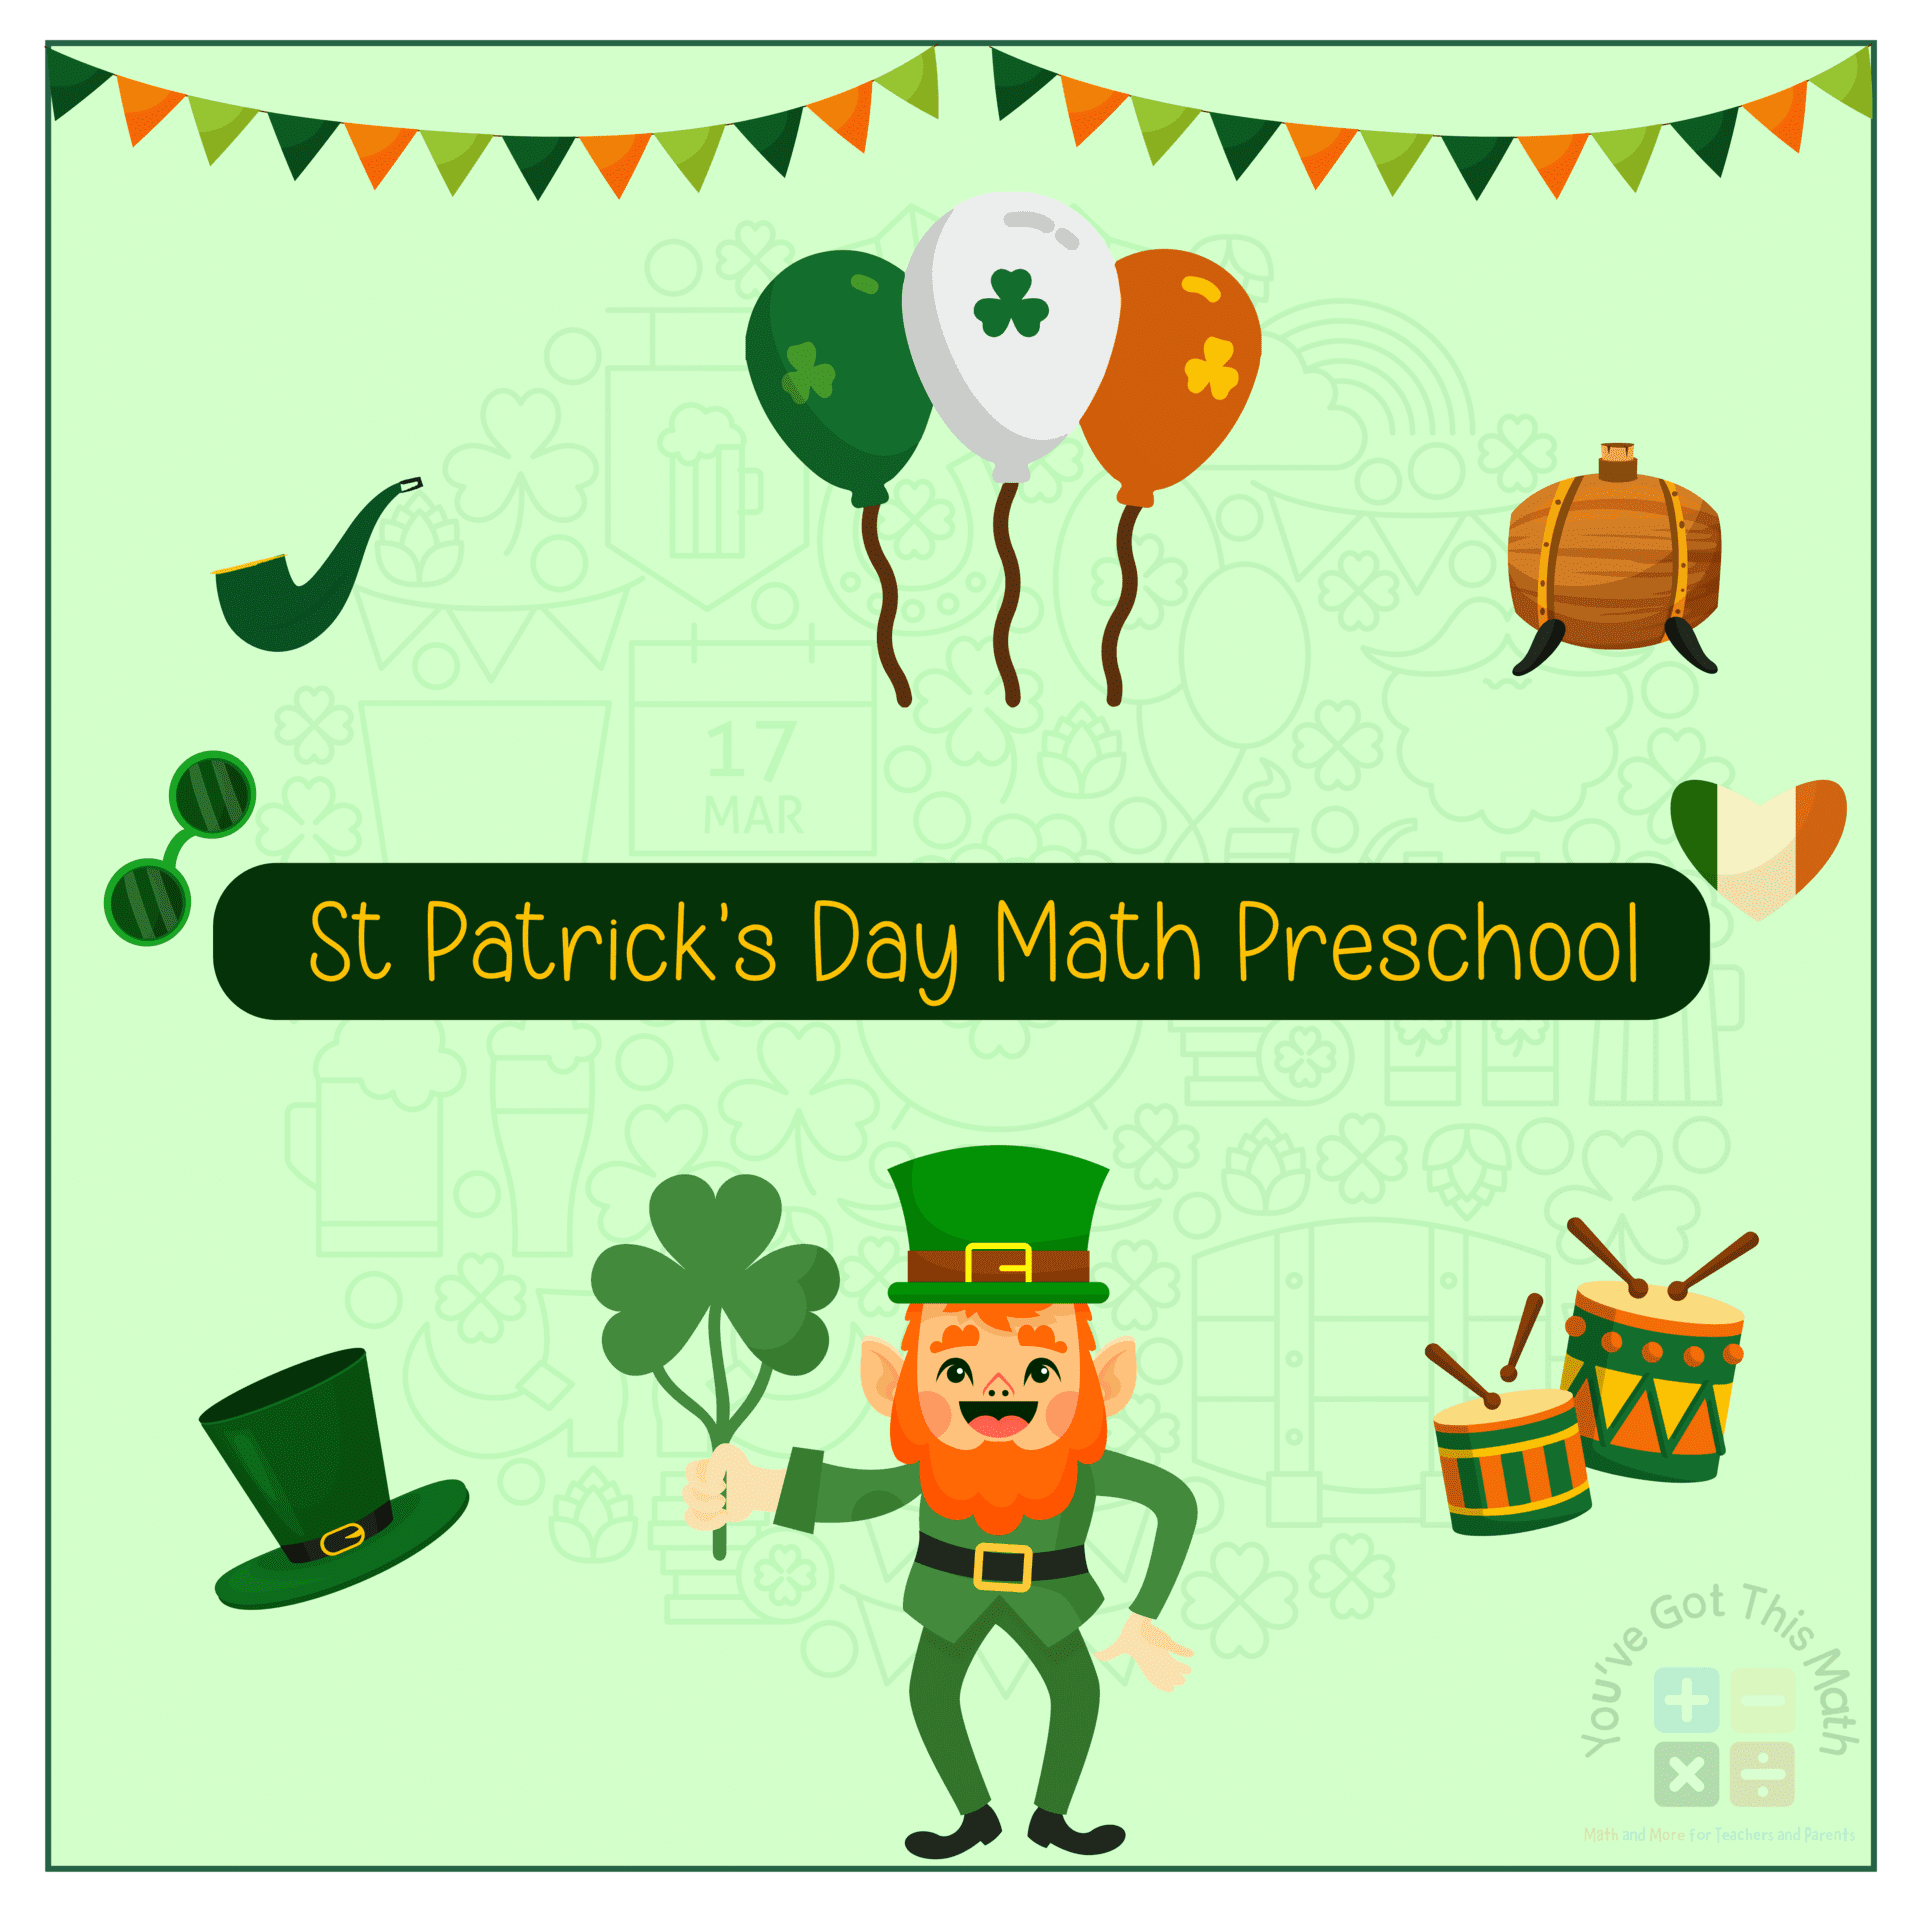 using many themes to describe St Patrick's Day Math